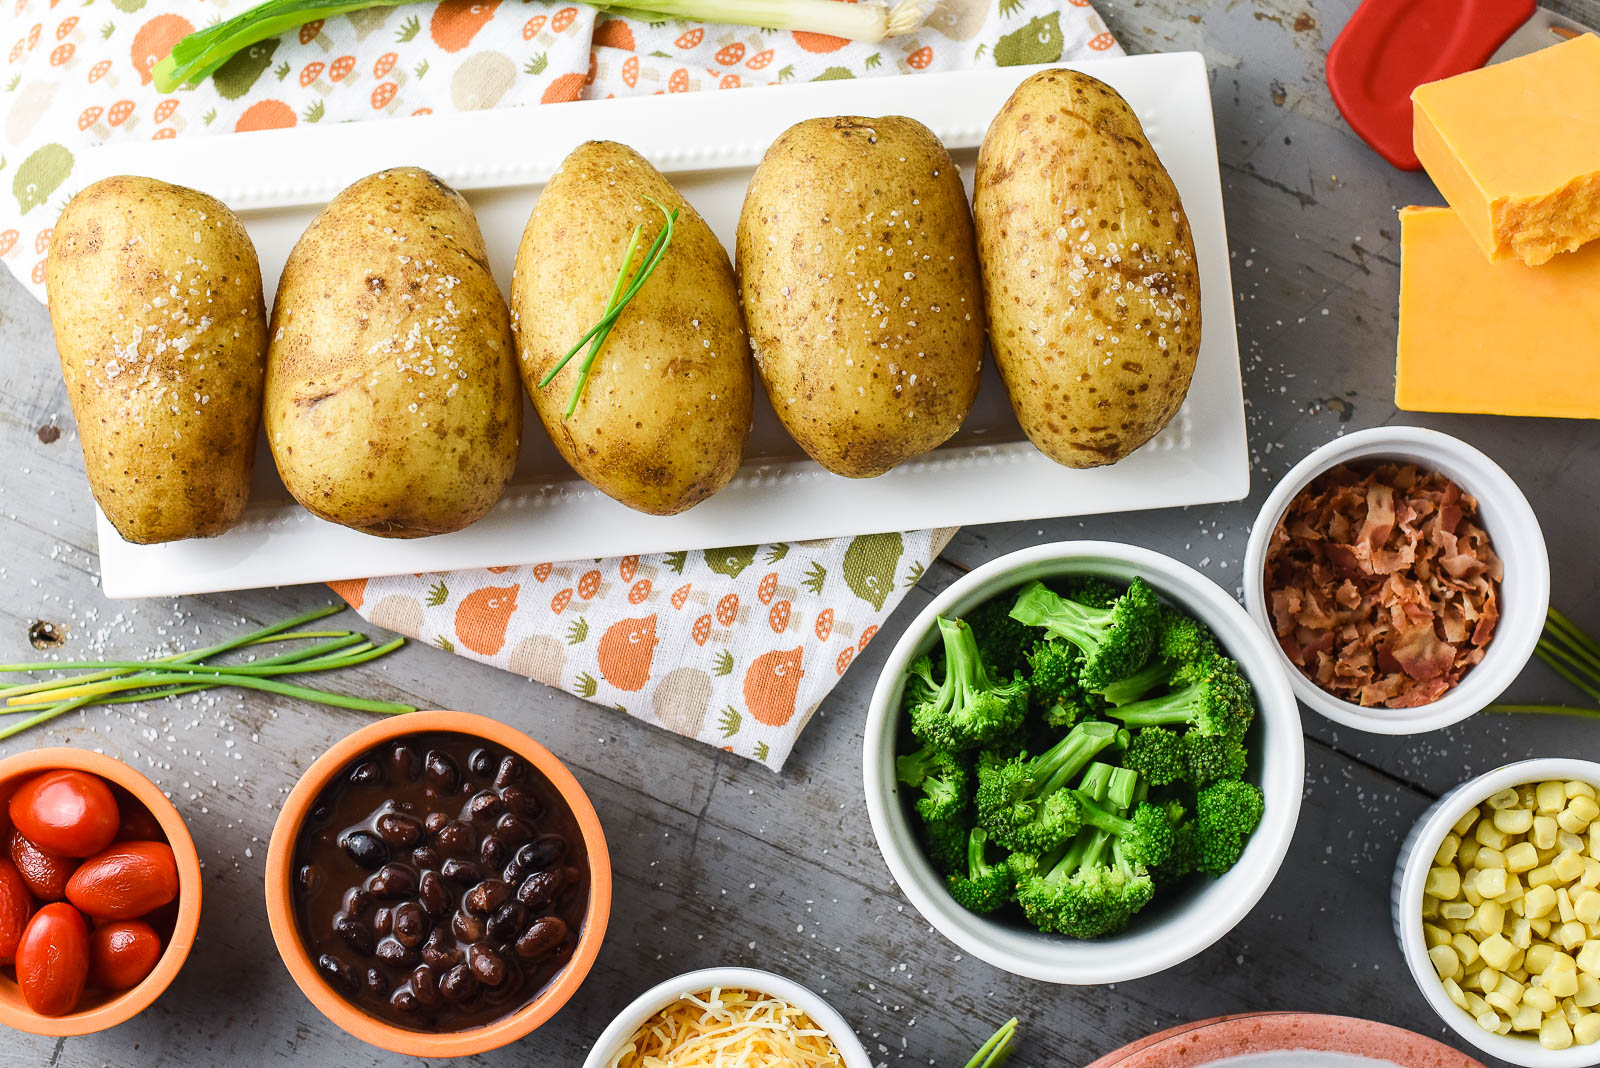 A Kid-Friendly Baked Potato Bar with Slow Cooker Baked Potatoes